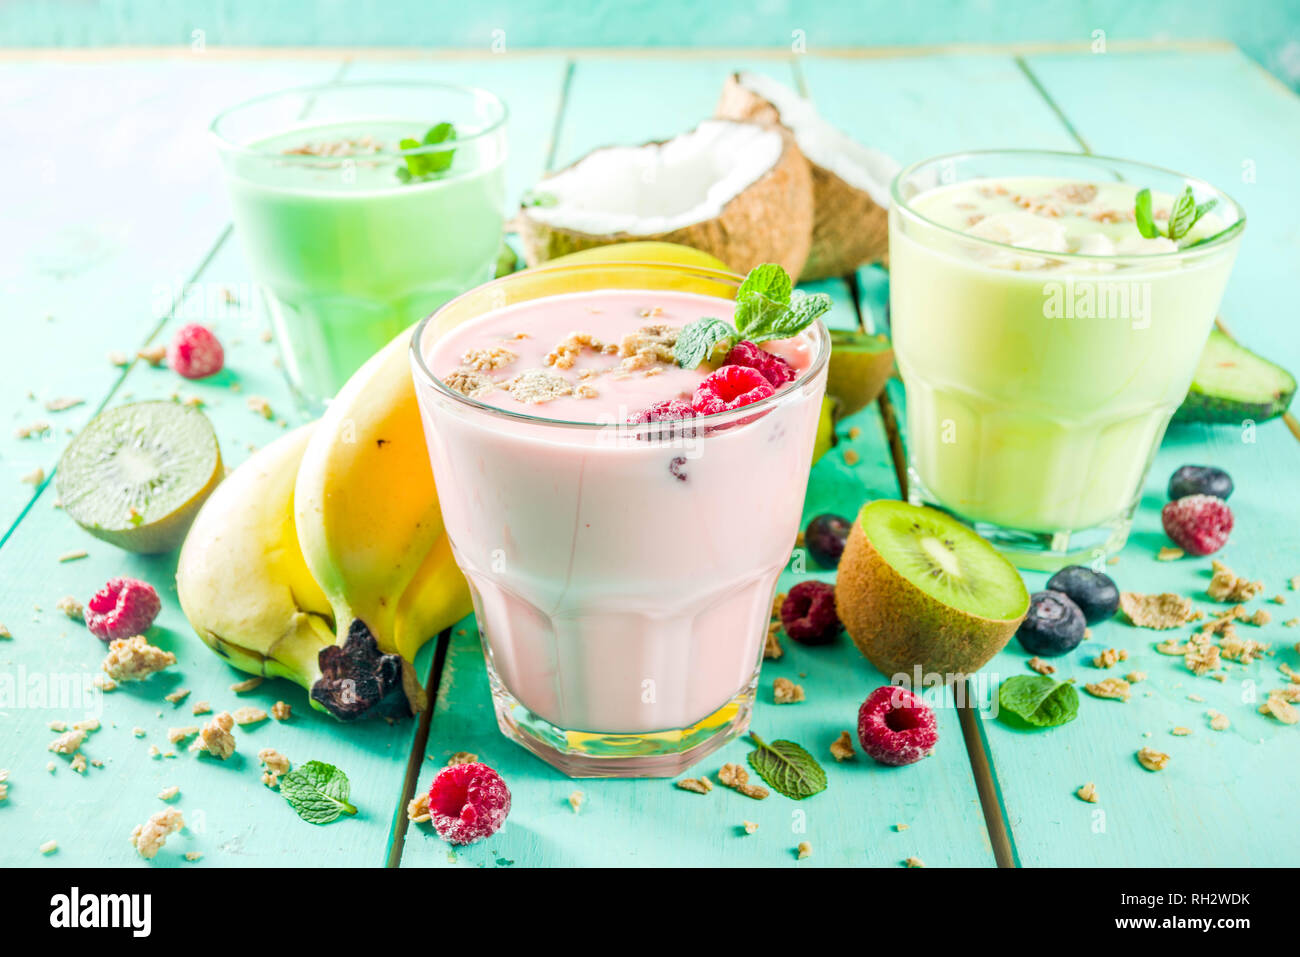 Summer refreshing drinks - protein shakes, milkshakes or smoothies, with fresh berry and fruits, light blue table copy space Stock Photo